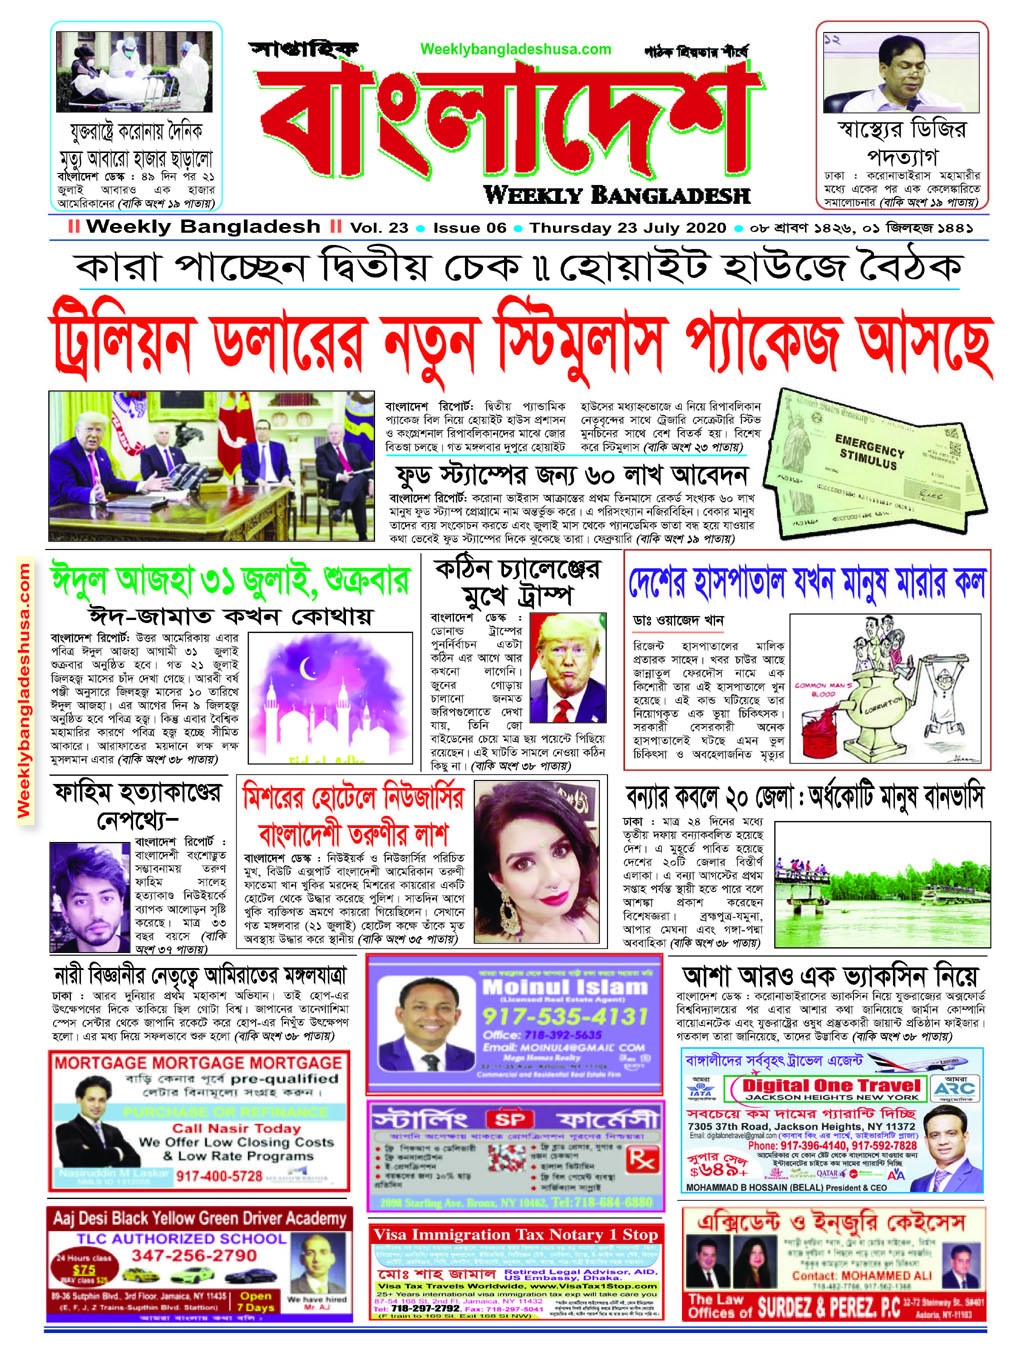 VOL_23_ISSUE 06_23 JULY 2020